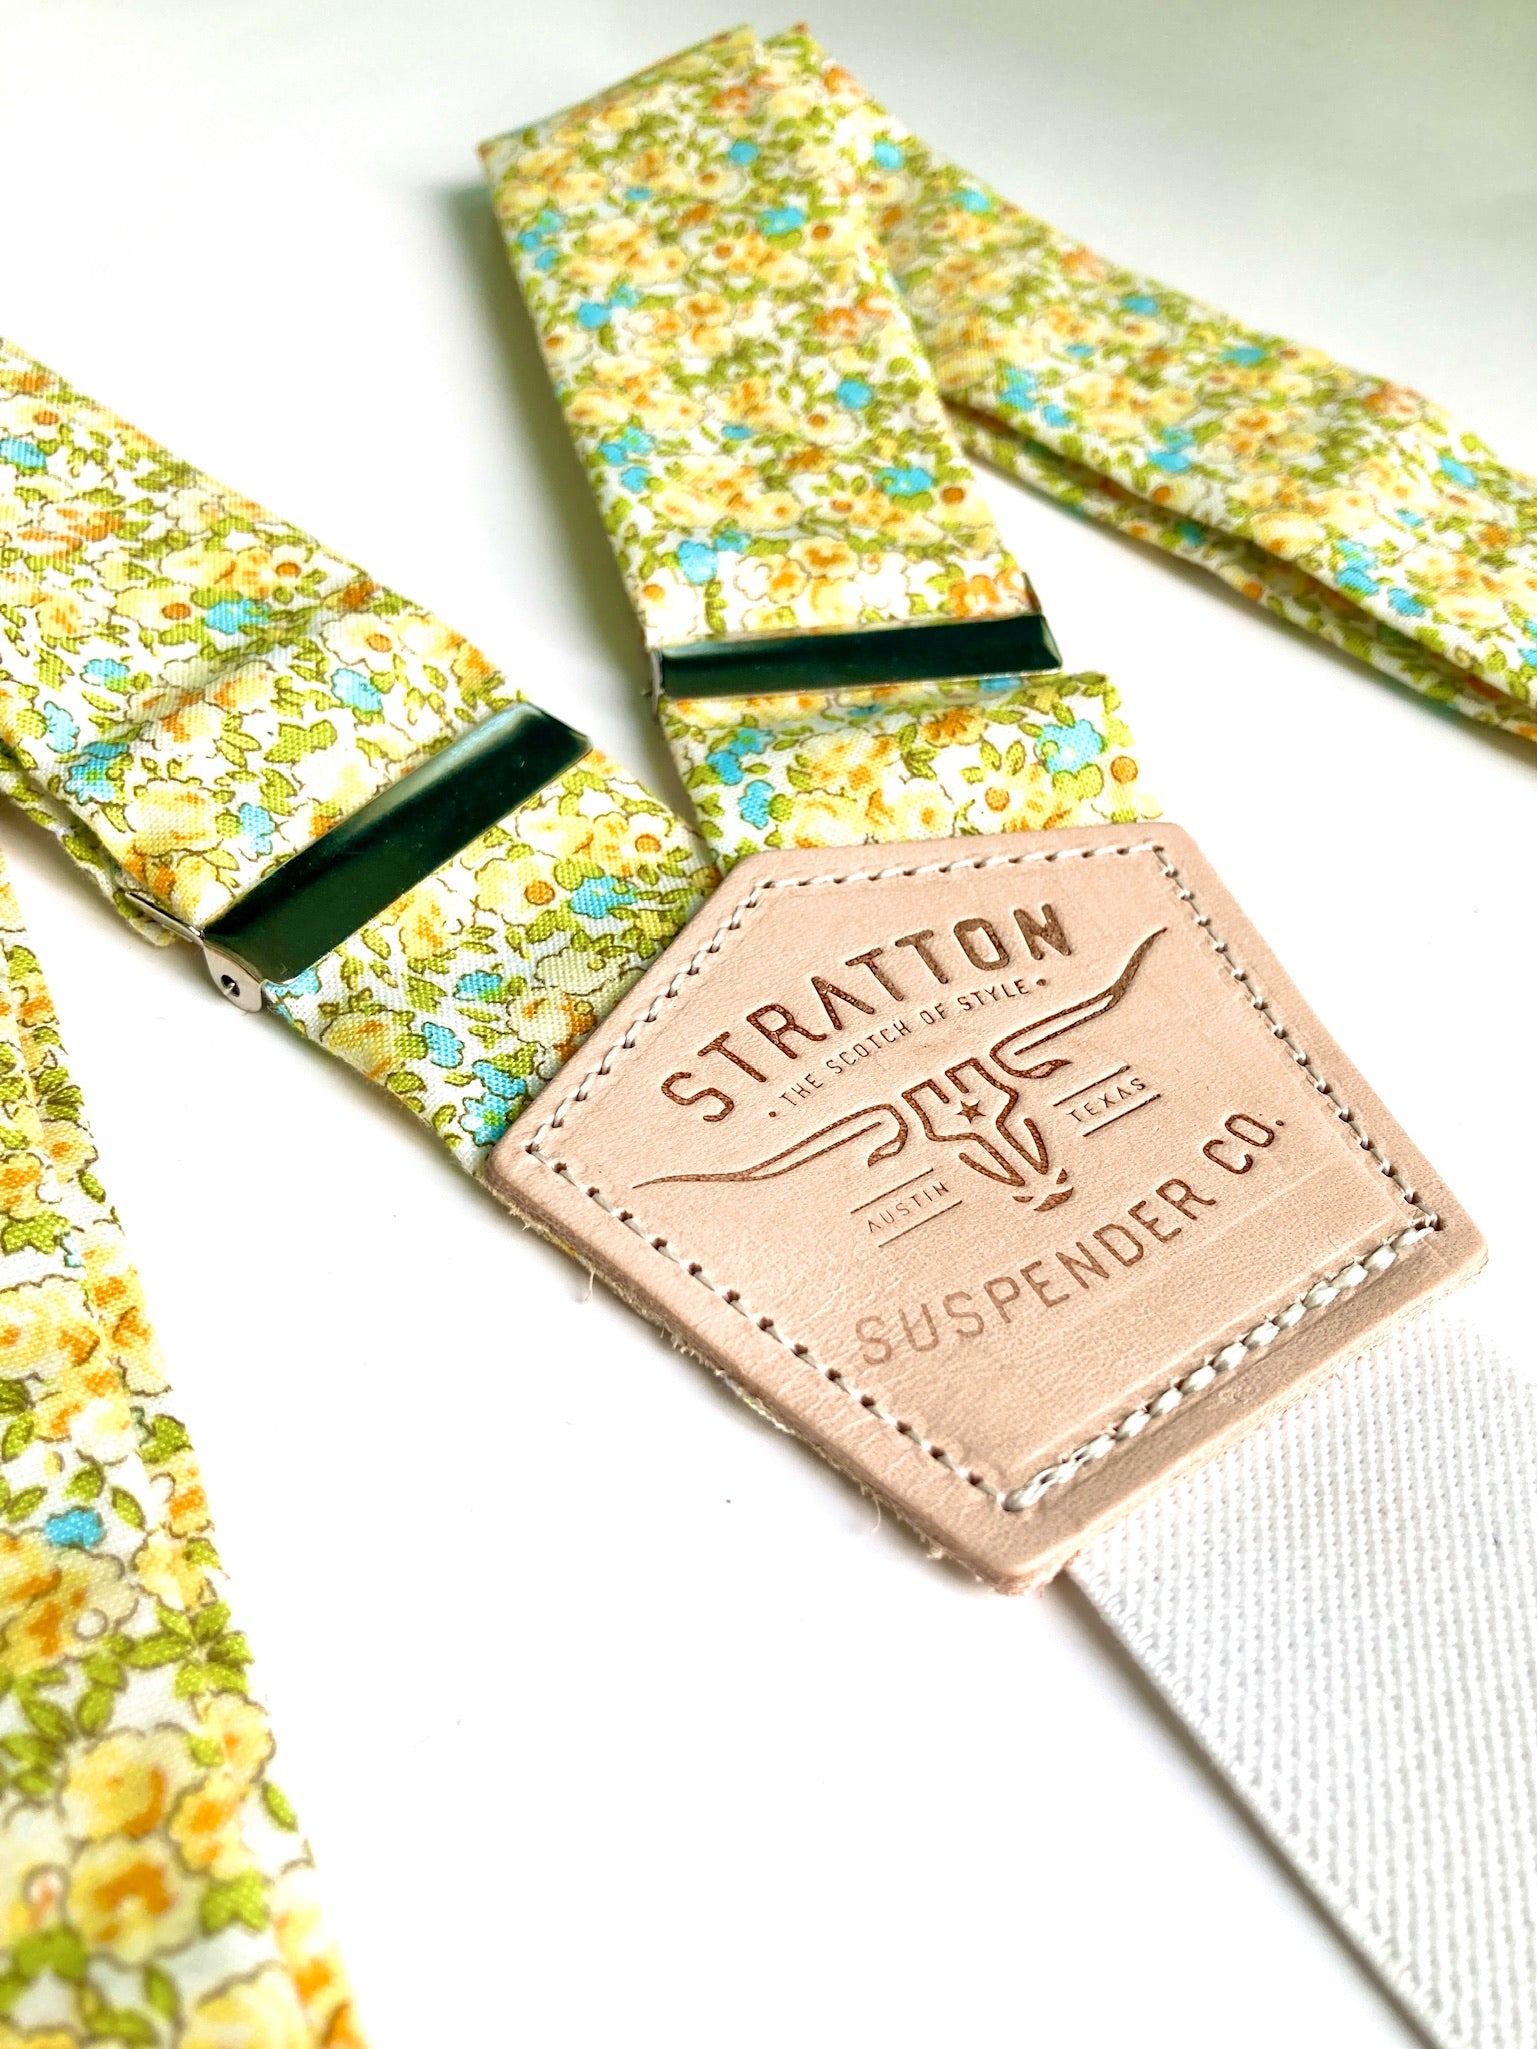 Stratton Suspenders in Summertime Yellow Floral